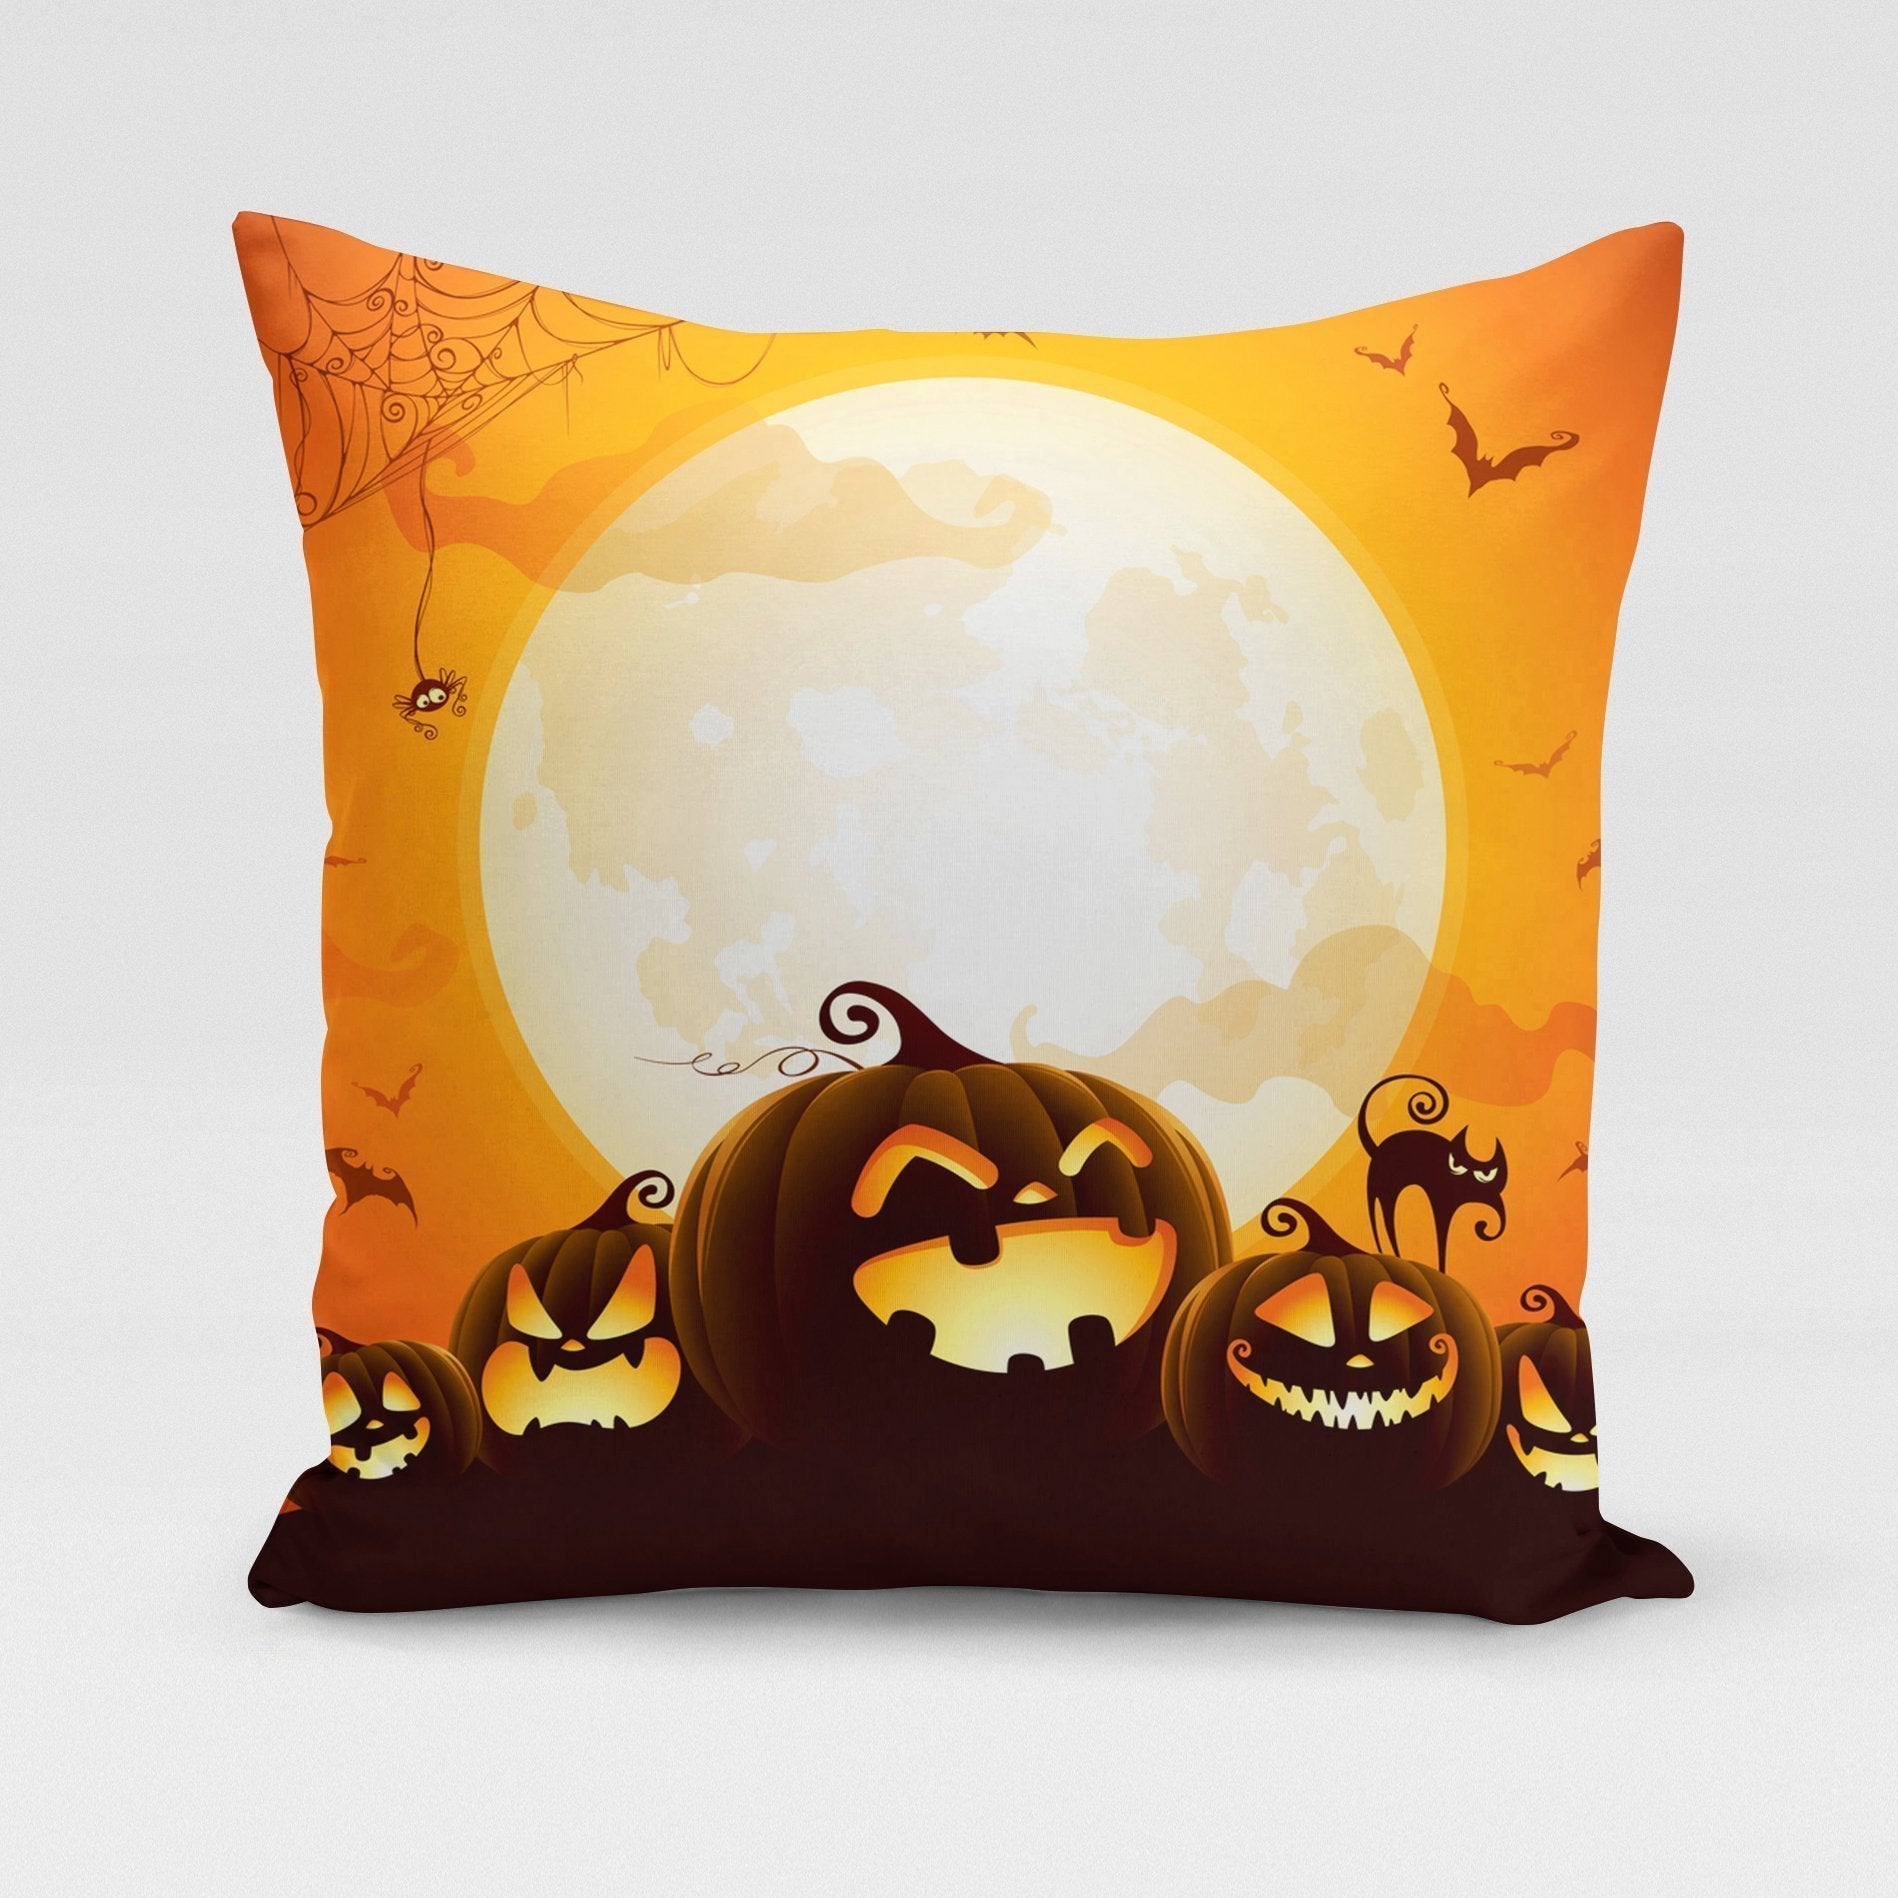 G128 18 x 18 in Fall Pumpkin Oil Painting Style Waterproof Pillow Covers, Set of 4